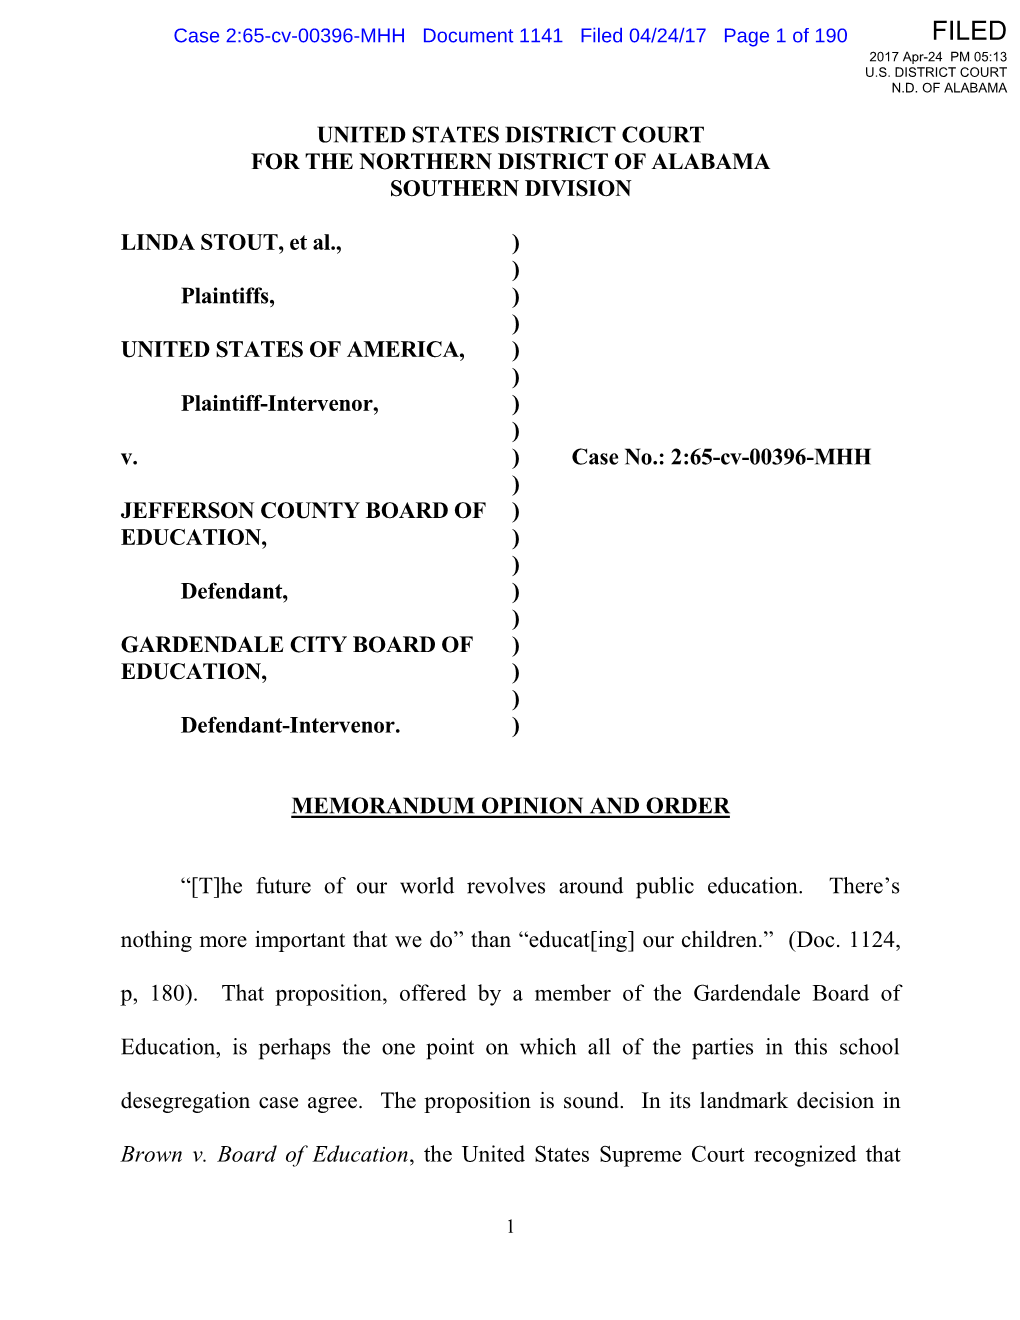 UNITED STATES DISTRICT COURT for the NORTHERN DISTRICT of ALABAMA SOUTHERN DIVISION LINDA STOUT, Et Al., Plaintiffs, UNITED STAT